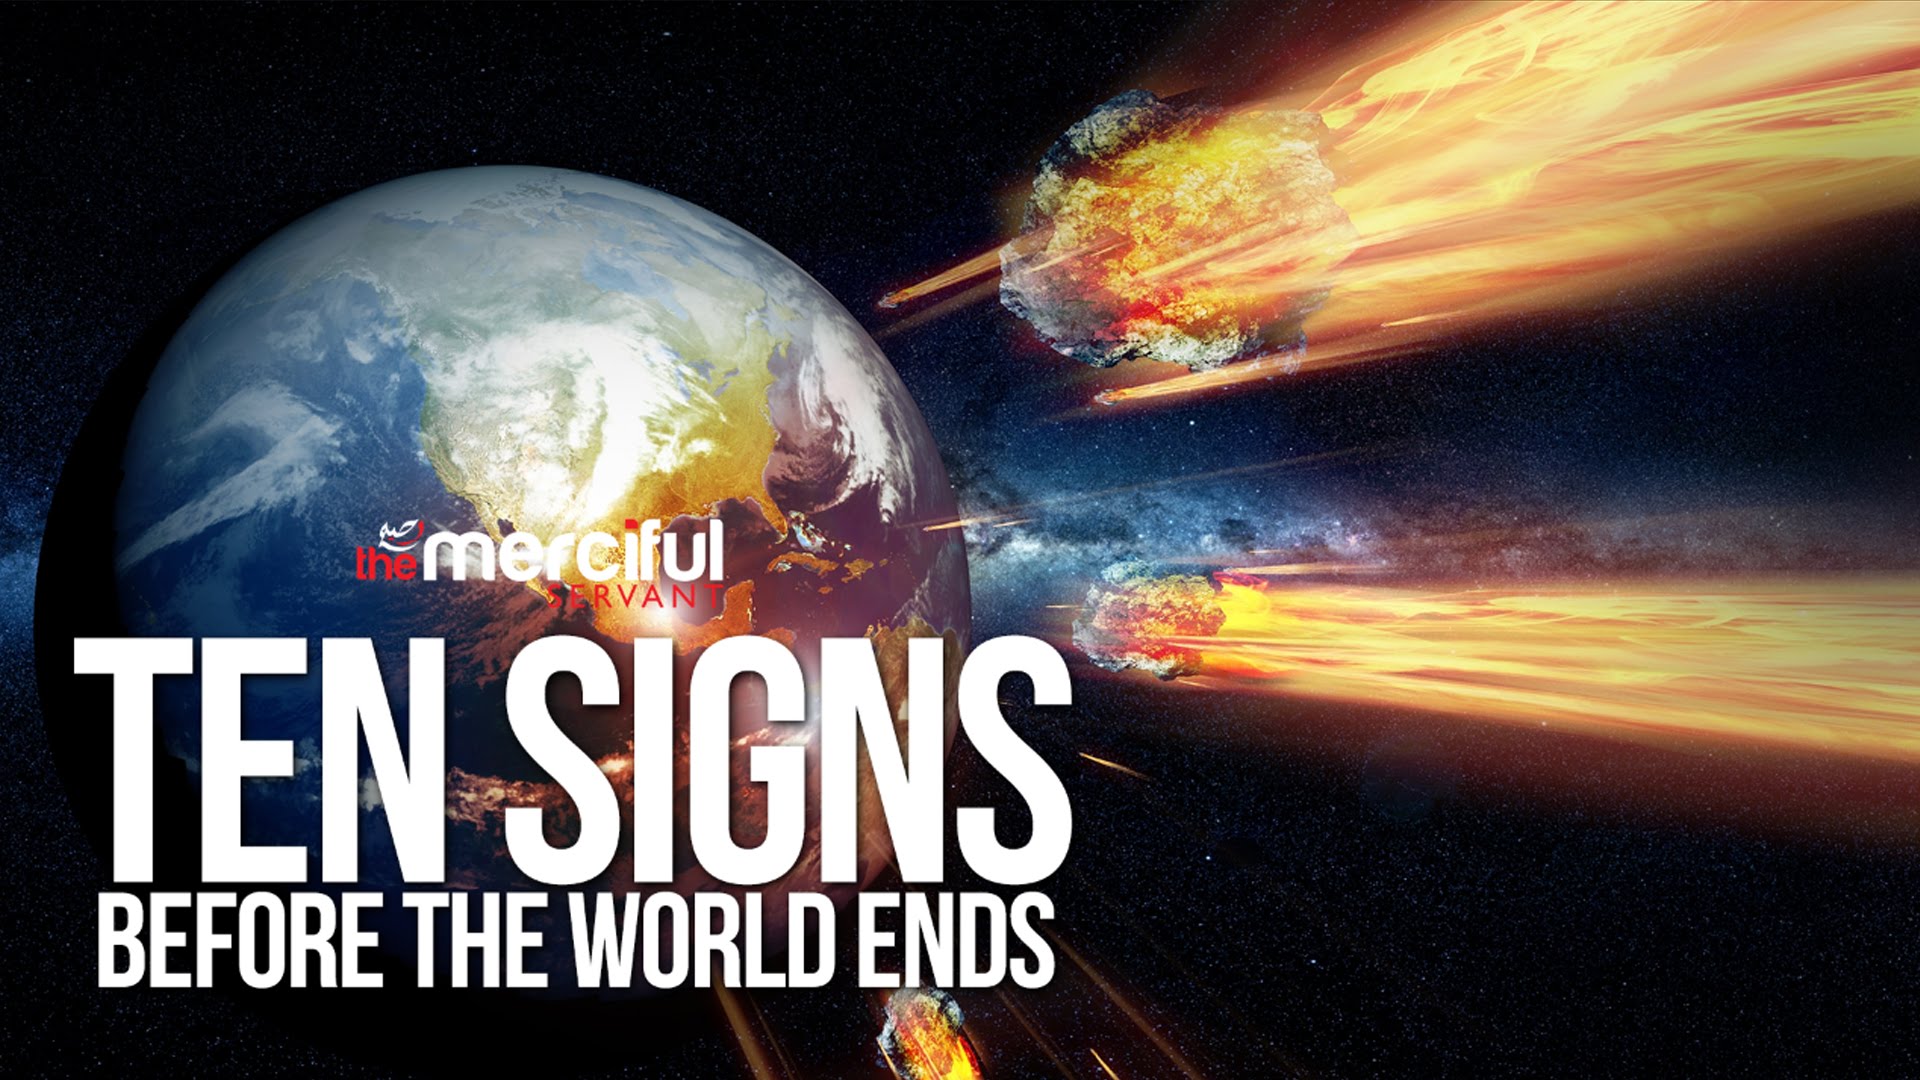 The 10 Major Signs Before the World Ends